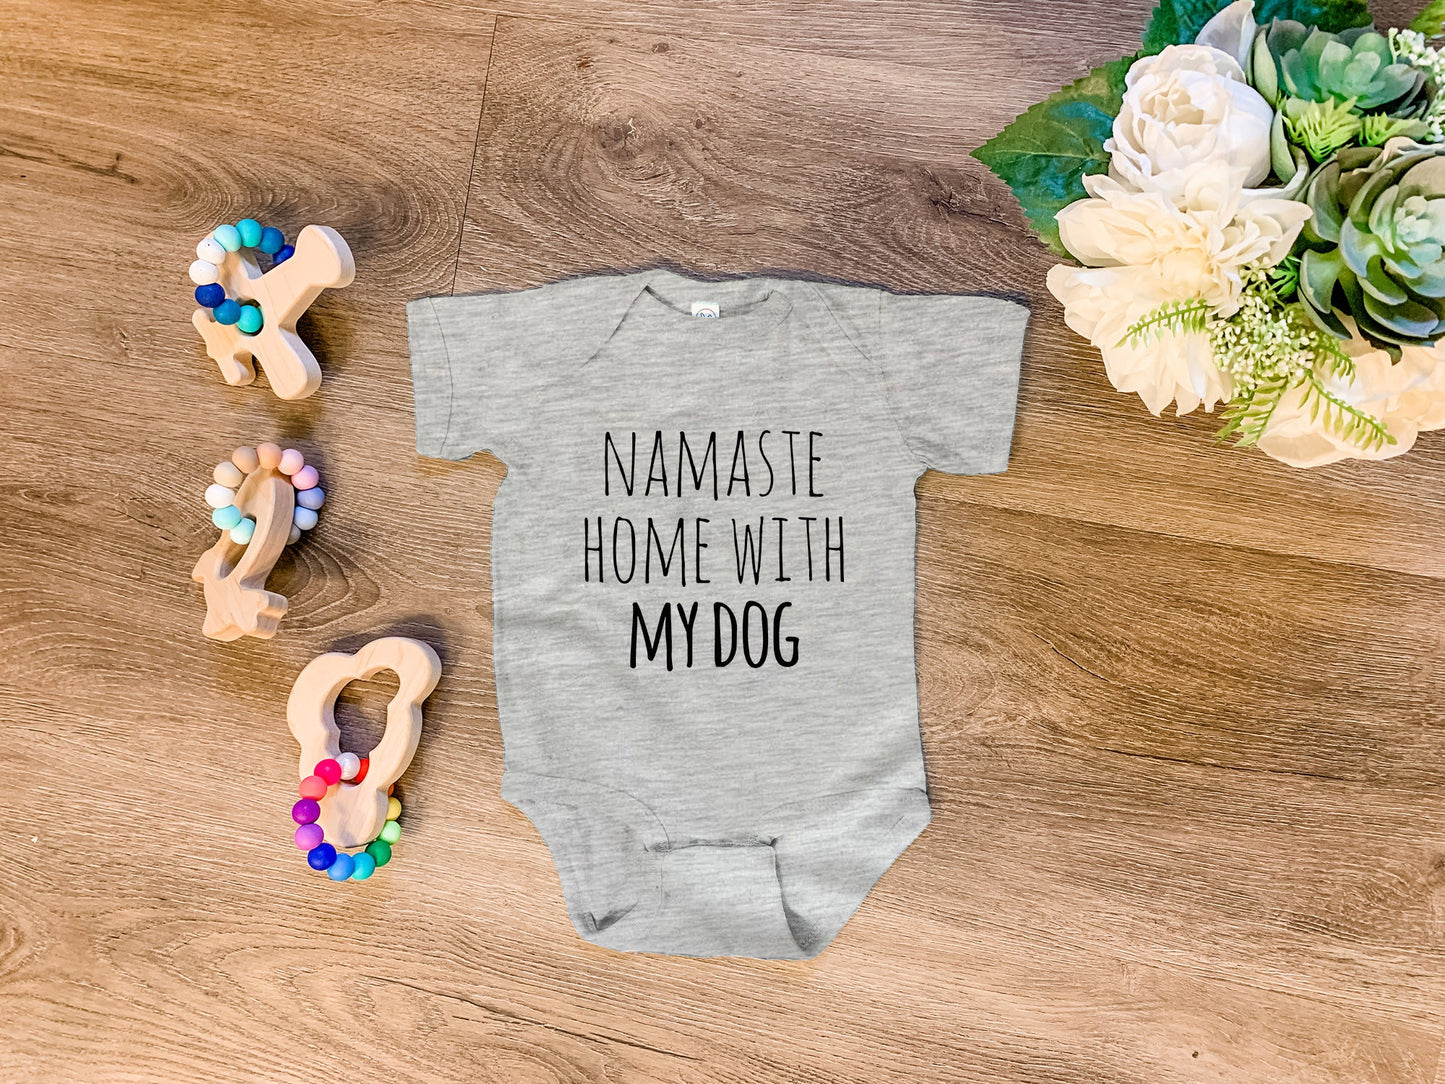 Namaste Home With My Dog - Onesie - Heather Gray, Chill, or Lavender